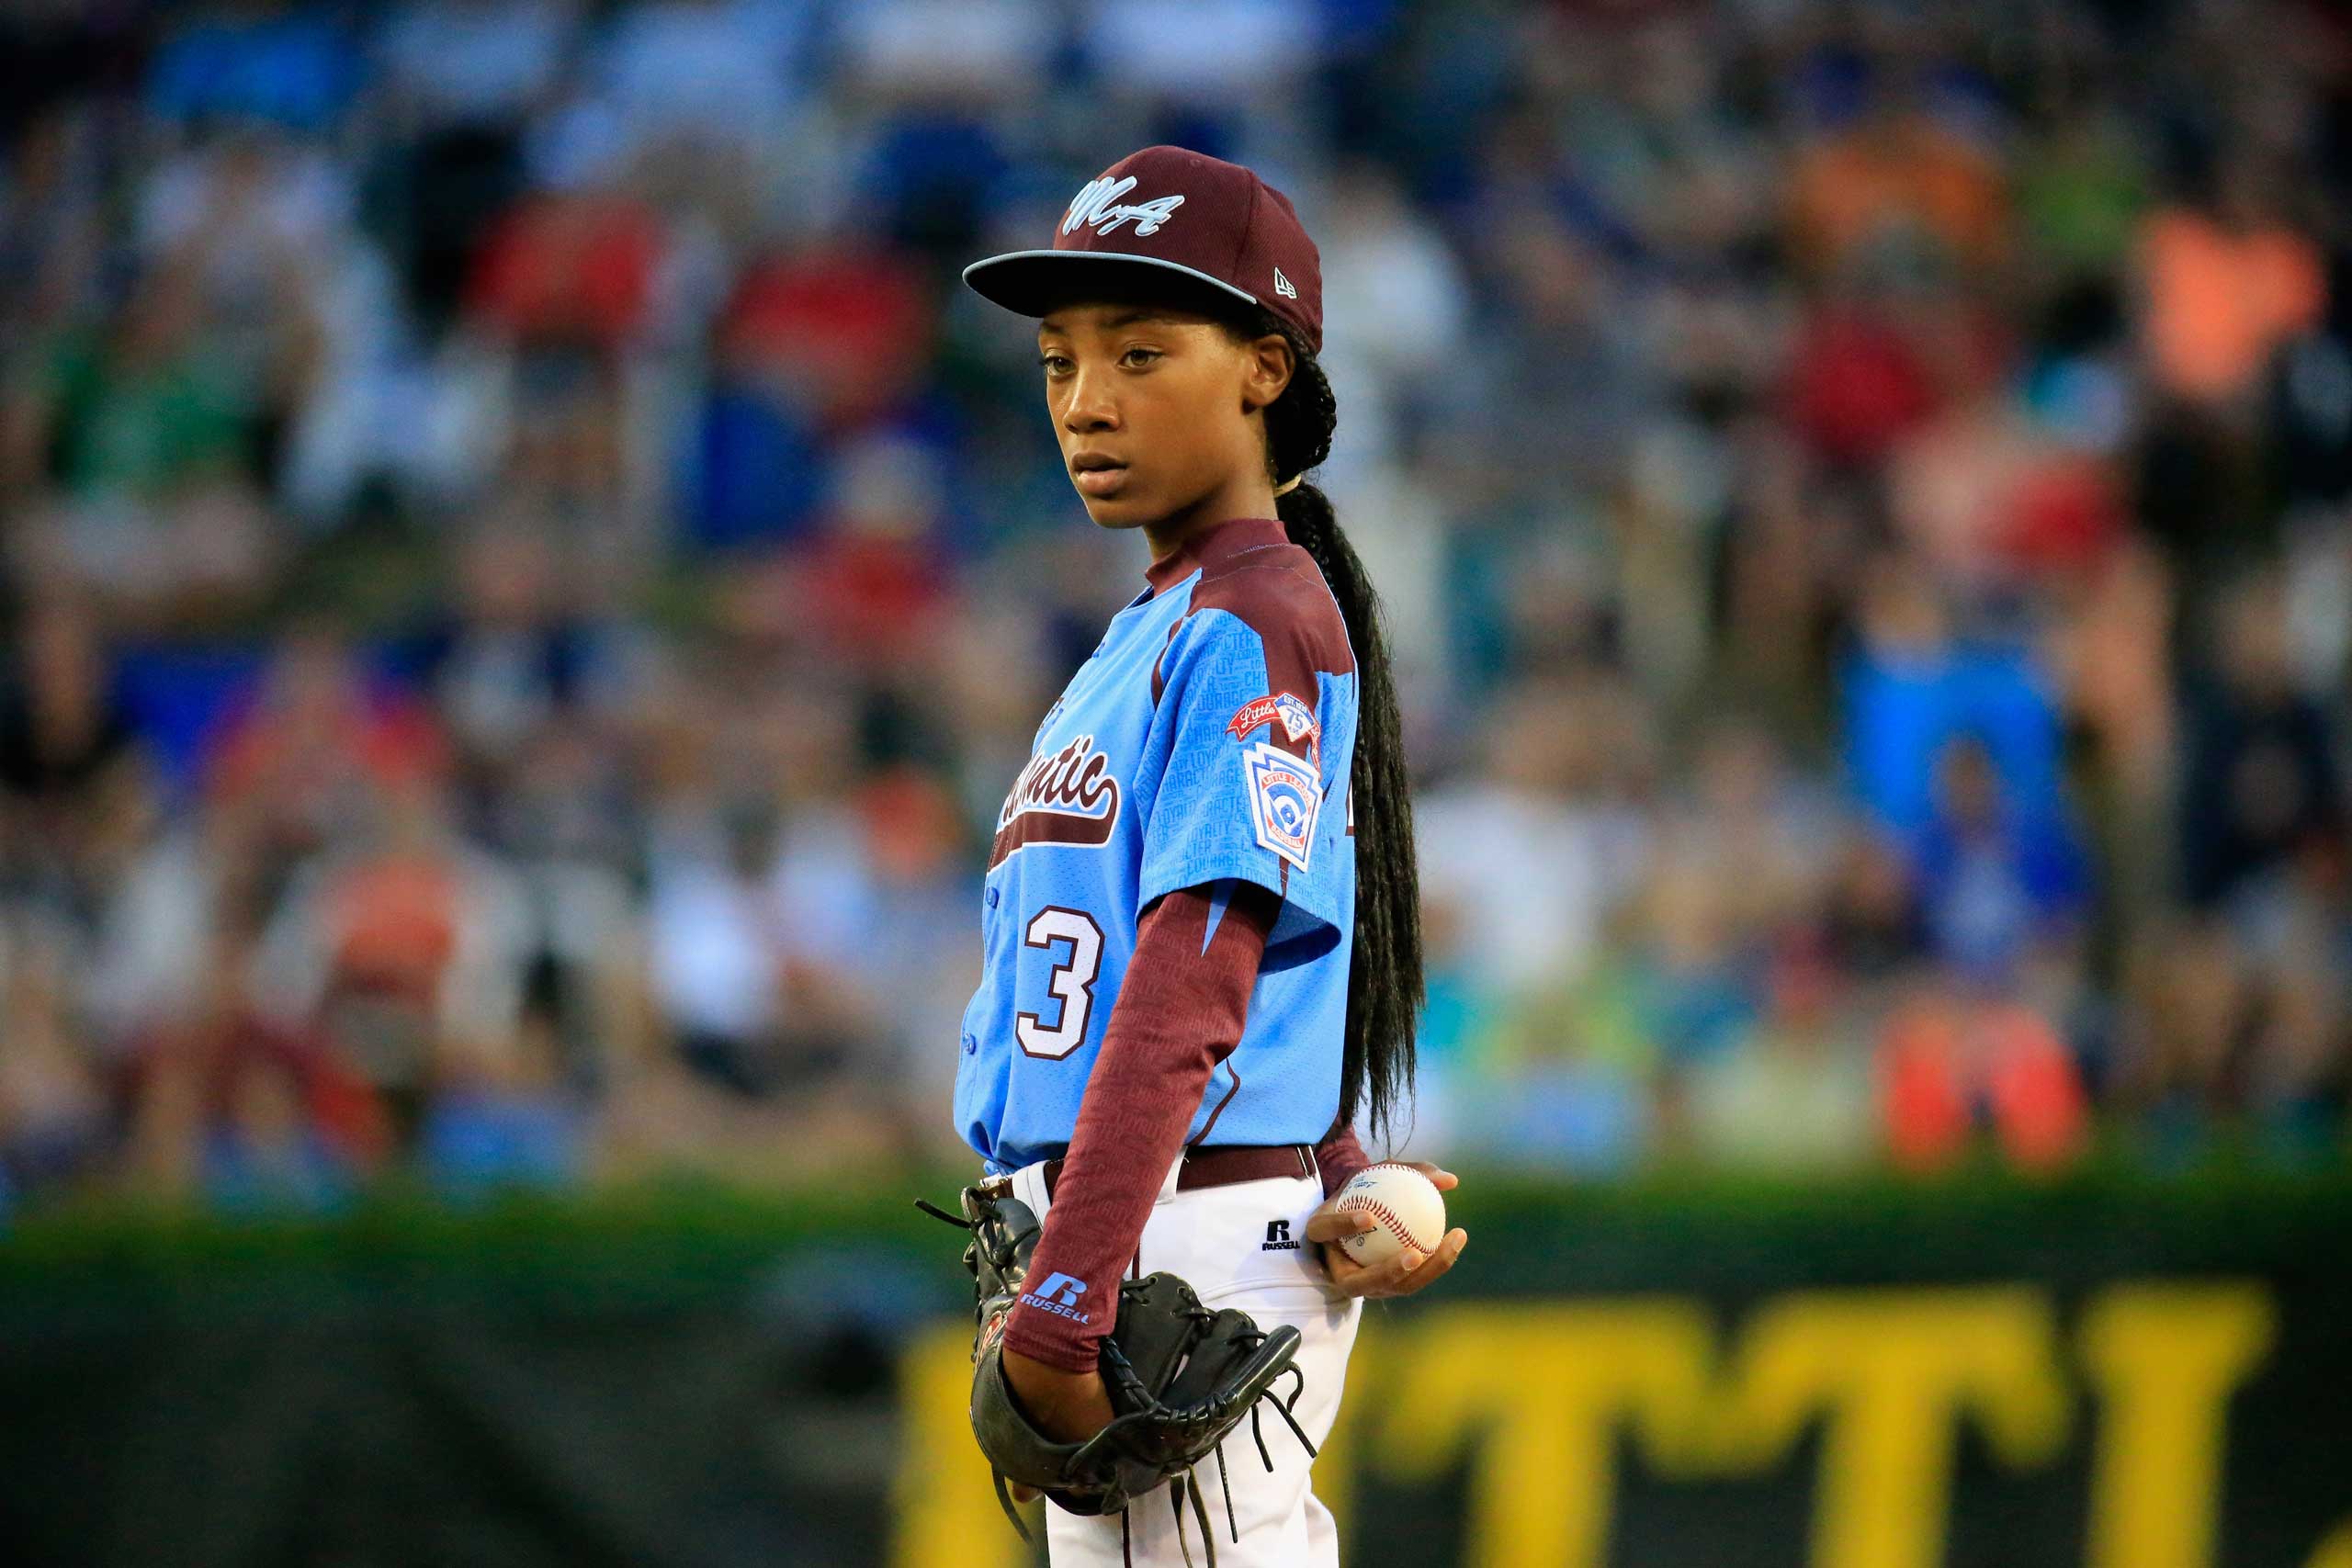 Mo'ne Davis during the United States division game at the Little League World Series tournament at Lamade Stadium on Aug. 20, 2014 in South Williamsport, Pa.